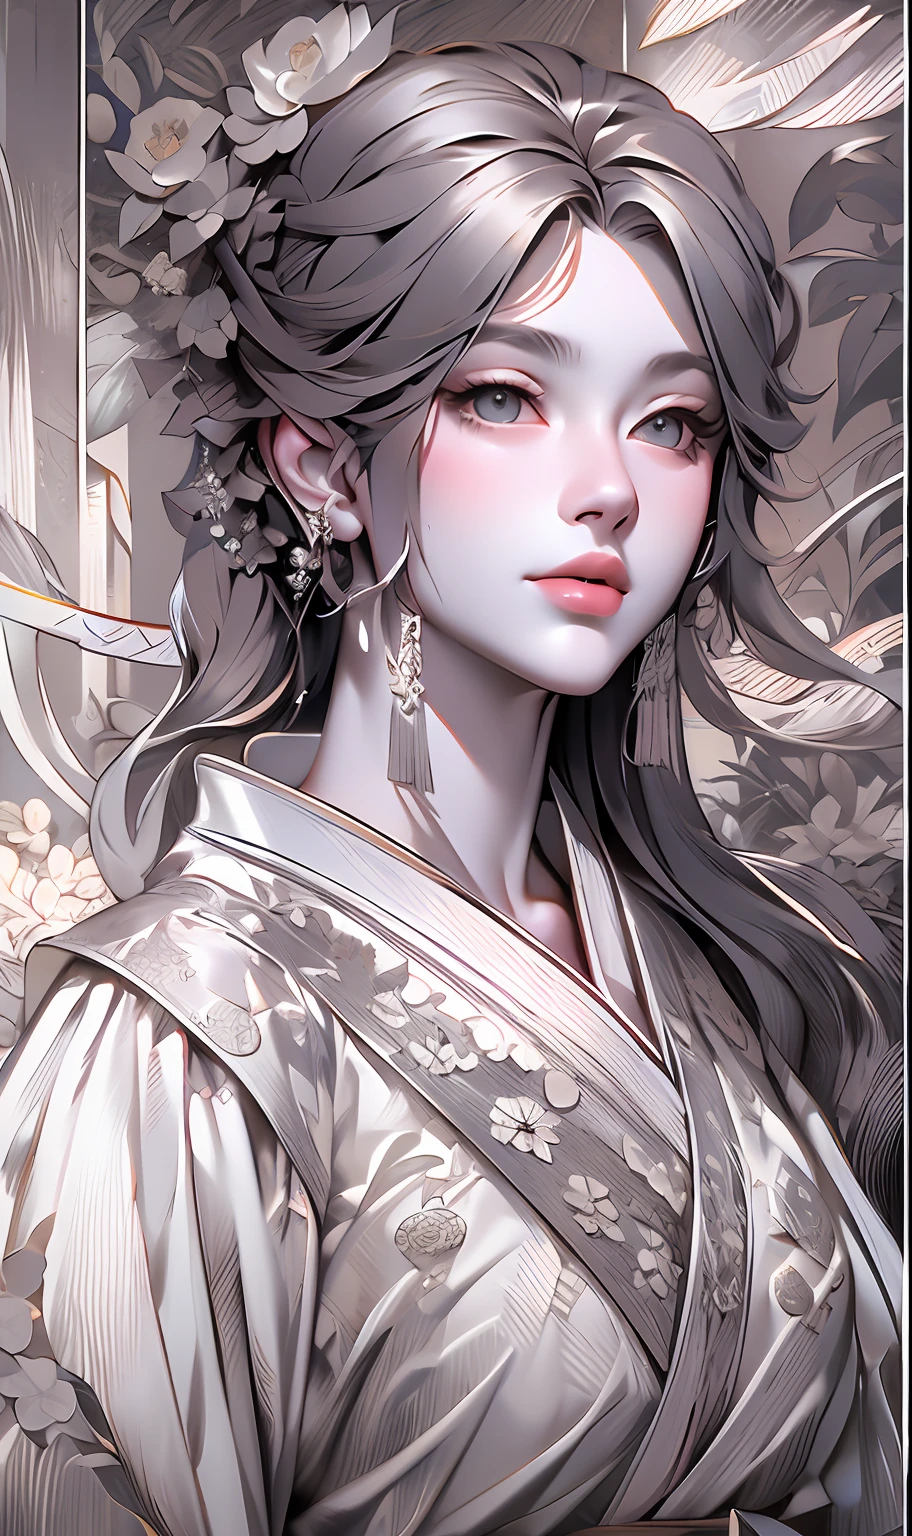 A girl, ancient Chinese costume, sunshine, clear face, clean white background, masterpiece, super detail, epic composition, ultra HD, high quality, extremely detailed, official art, uniform 8k wallpaper, super detail, beautiful line art, detailed manga style, extremely fine ink lineart, black and white manga style, black and white line art, ink manga drawing, intense line art, pencil and ink manga drawing, intense black line art, in style of manga, exquisite line art, perfect lineart,exquisite line art, exquisite digital illustration, detailed digital drawing, black and white coloring, digital anime illustration, a beautiful artwork illustration, detailed matte fantasy portrait, beautiful line art, great digital art with details, goddess. extremely high detail, 4k detailed digital art, stunning digital illustration, digital fantasy illustration,((Best quality)), ((masterpiece)), (detailed:1.4), 3D, an image of a beautiful female,HDR (High Dynamic Range),Ray Tracing,NVIDIA RTX,Super-Resolution,Unreal 5,Subsurface scattering,PBR Texturing,Post-processing,Anisotropic Filtering,Depth-of-field,Maximum clarity and sharpness,Multi-layered textures,Albedo and Specular maps,Surface shading,Accurate simulation of light-material interaction,Perfect proportions,Octane Render, Two-tone lighting,Wide aperture,Low ISO,White balance,Rule of thirds,8K RAW